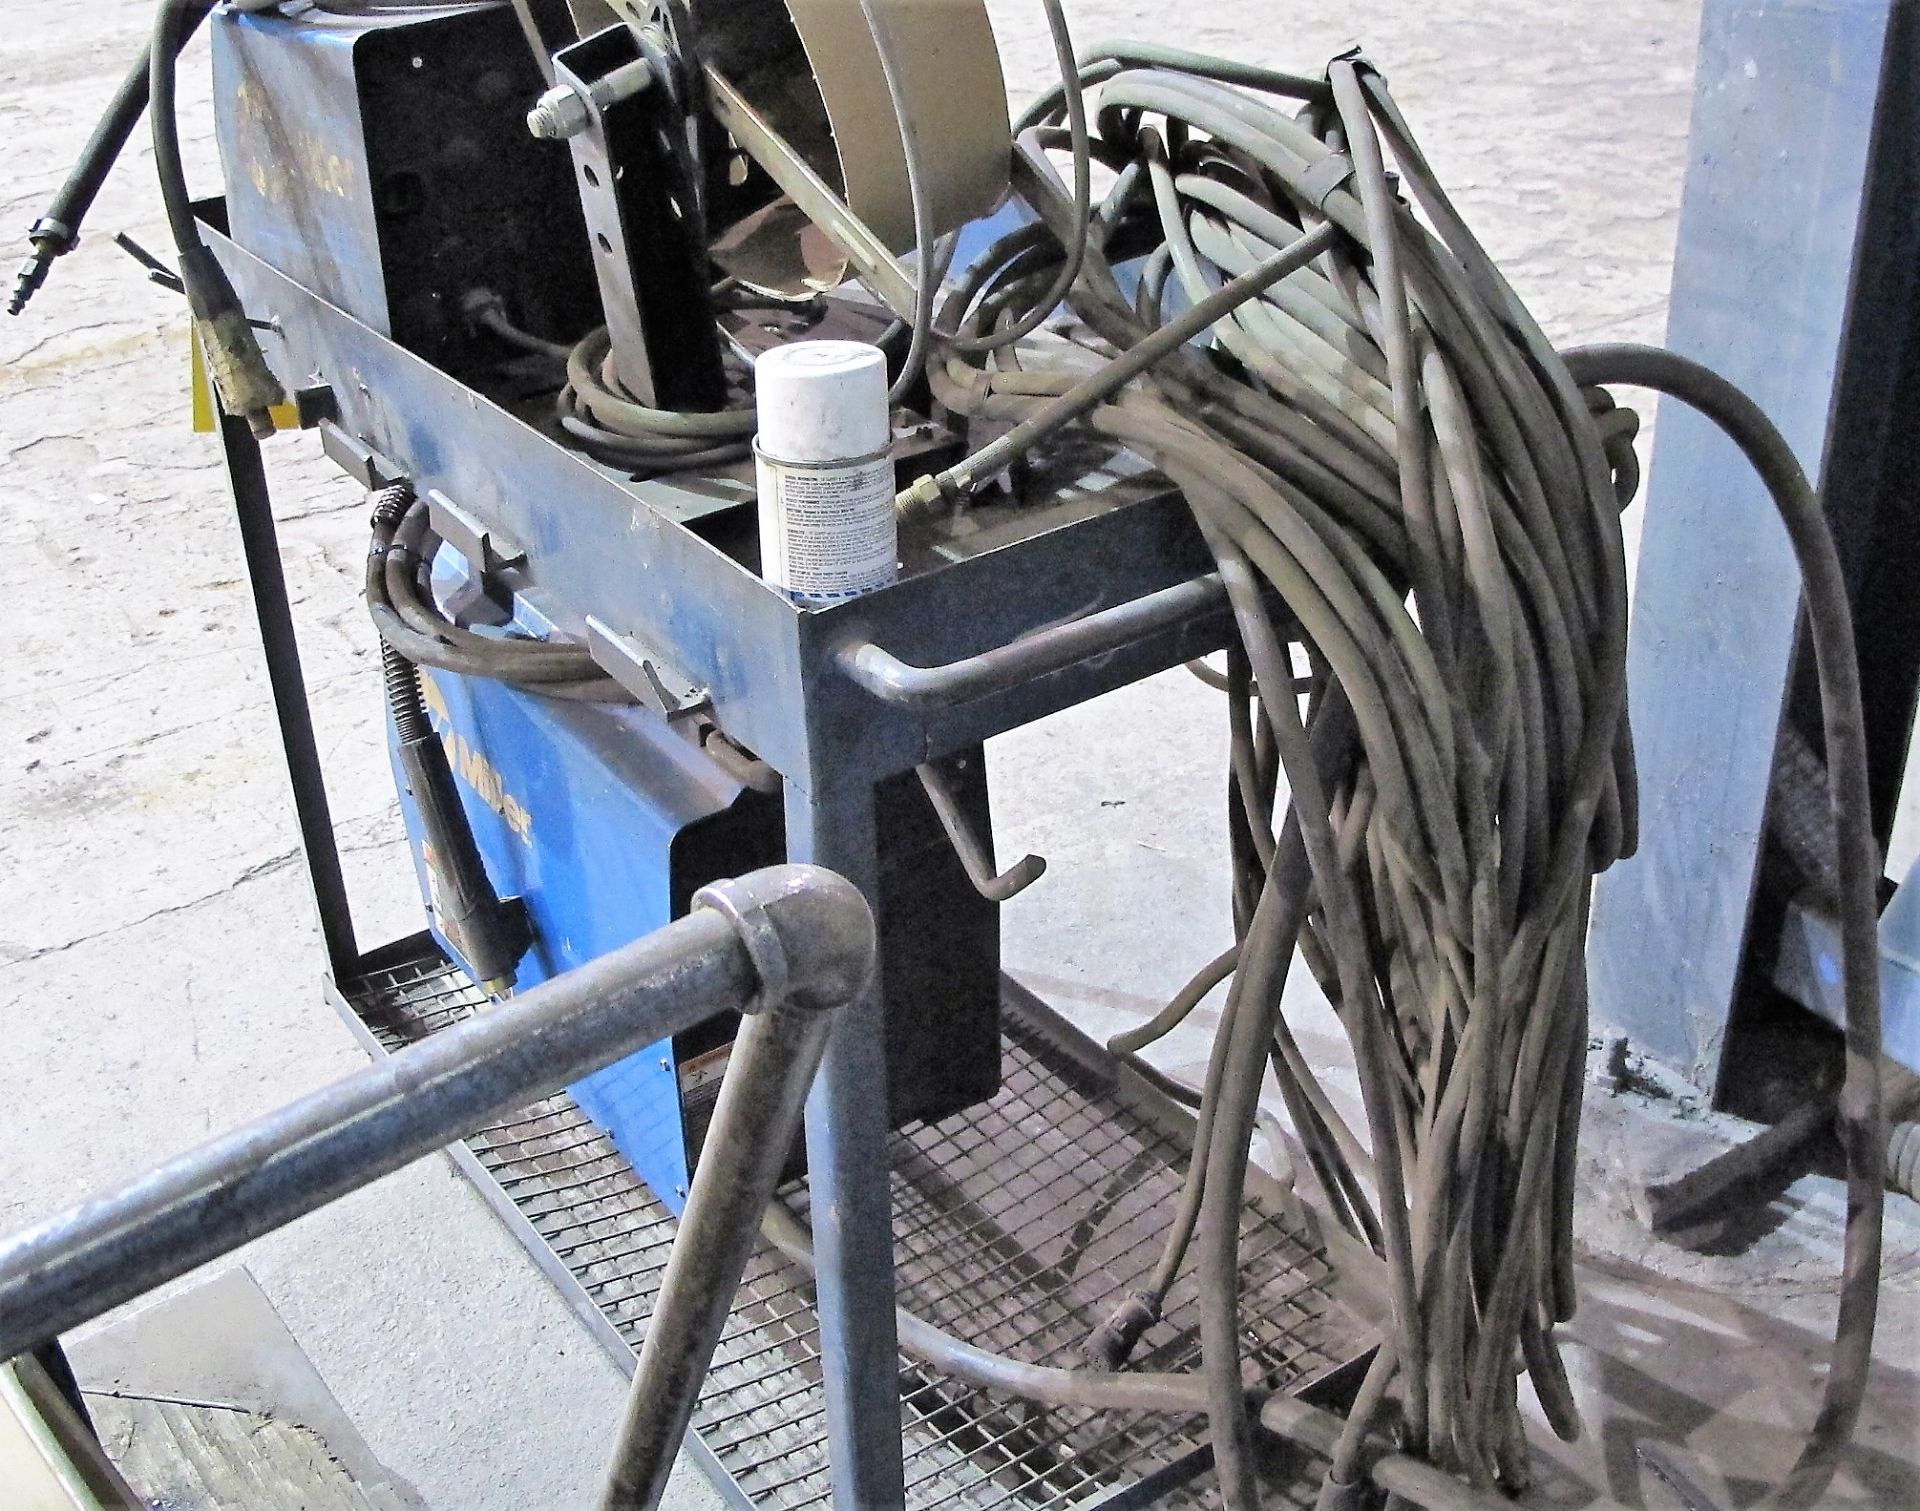 MILLER XMT 350 CC/CW WELDER, S/N LF470022A W/ MILLER 22A WIRE FEEDER, CABLES & CART - Image 4 of 4